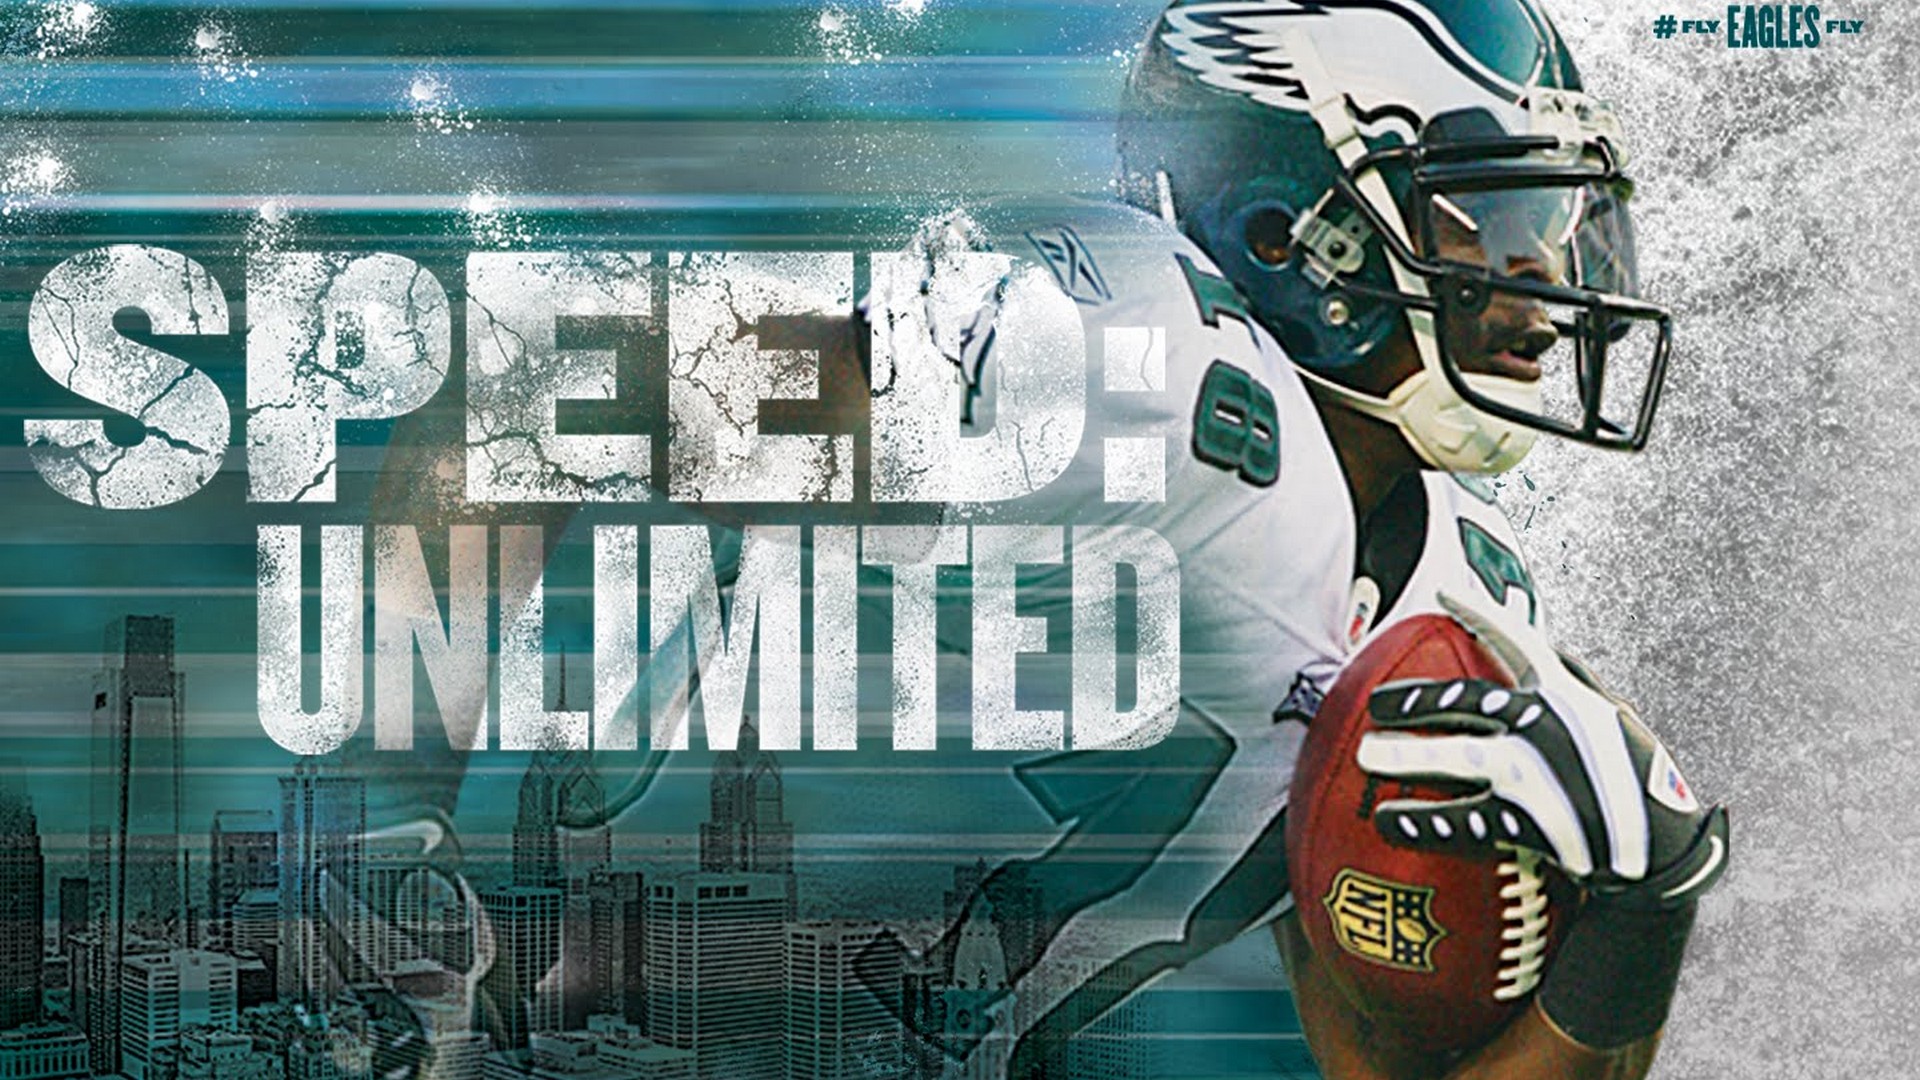 Windows Wallpaper NFL Eagles With Resolution 1920X1080 pixel. You can make this wallpaper for your Mac or Windows Desktop Background, iPhone, Android or Tablet and another Smartphone device for free